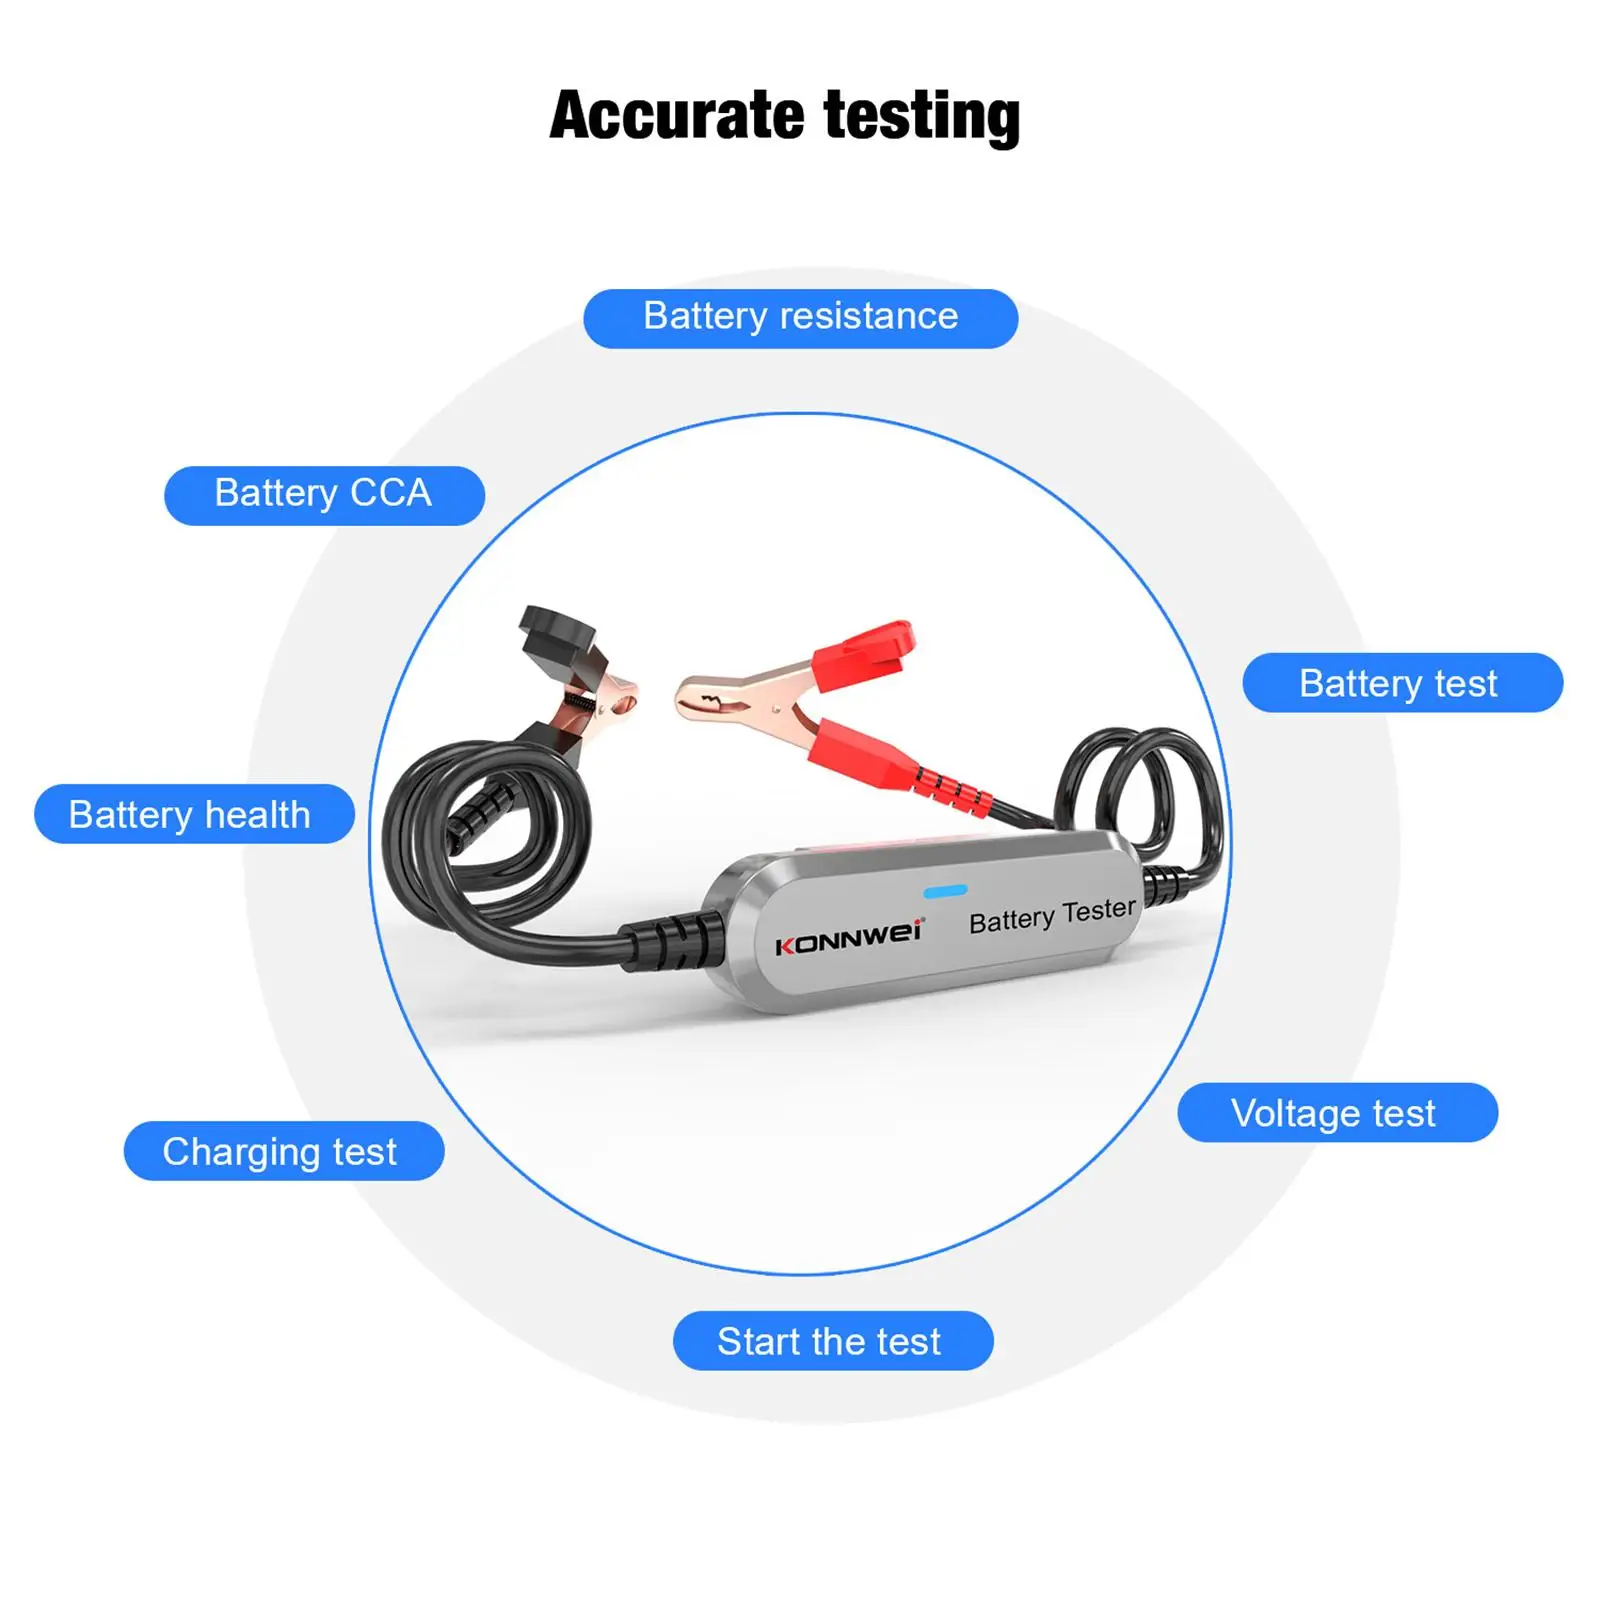 BK100 Wireless Car Battery Tester Charging Analyzer Bluetooth Battery Tester for Acid Battery Cars Trucks Multi Languages